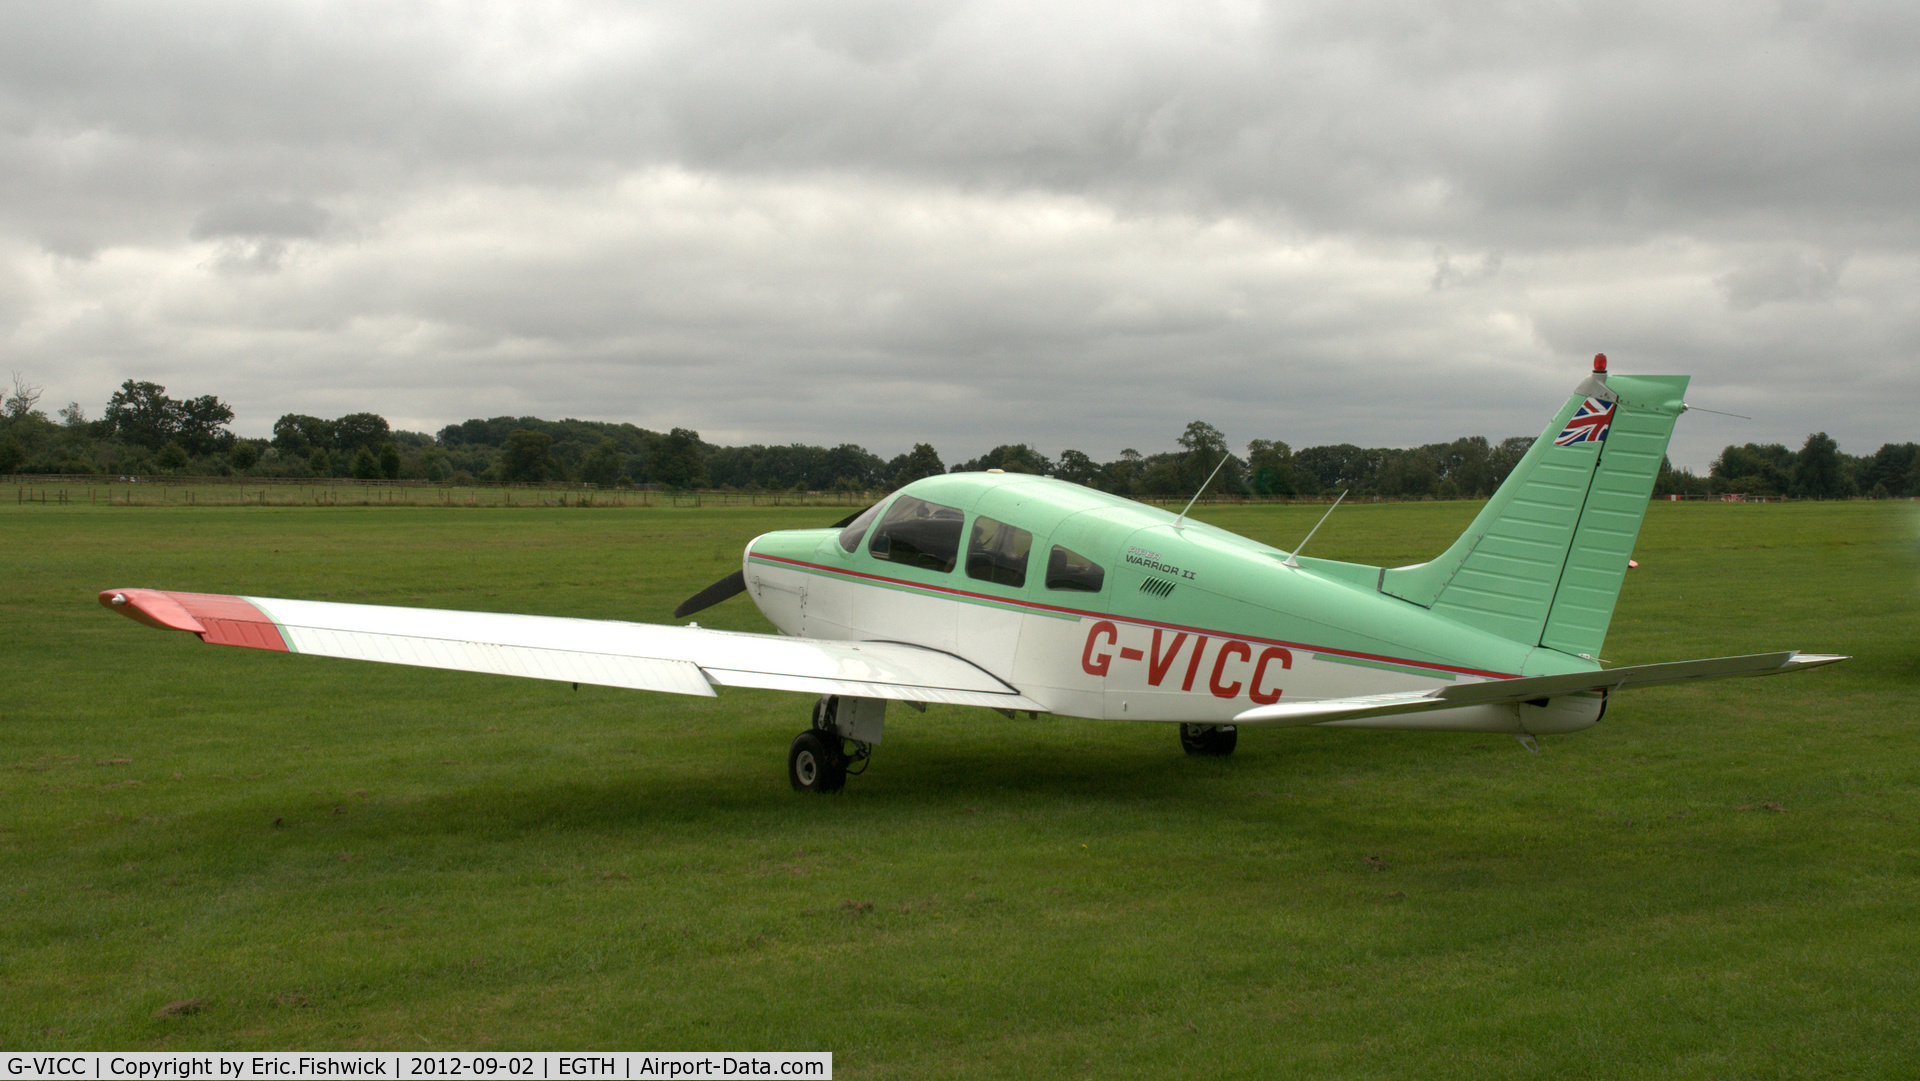 G-VICC, 1979 Piper PA-28-161 Cherokee Warrior II C/N 28-7916317, 1. G-VICC at Shuttleworth Pagent Air Display, Sept. 2012.